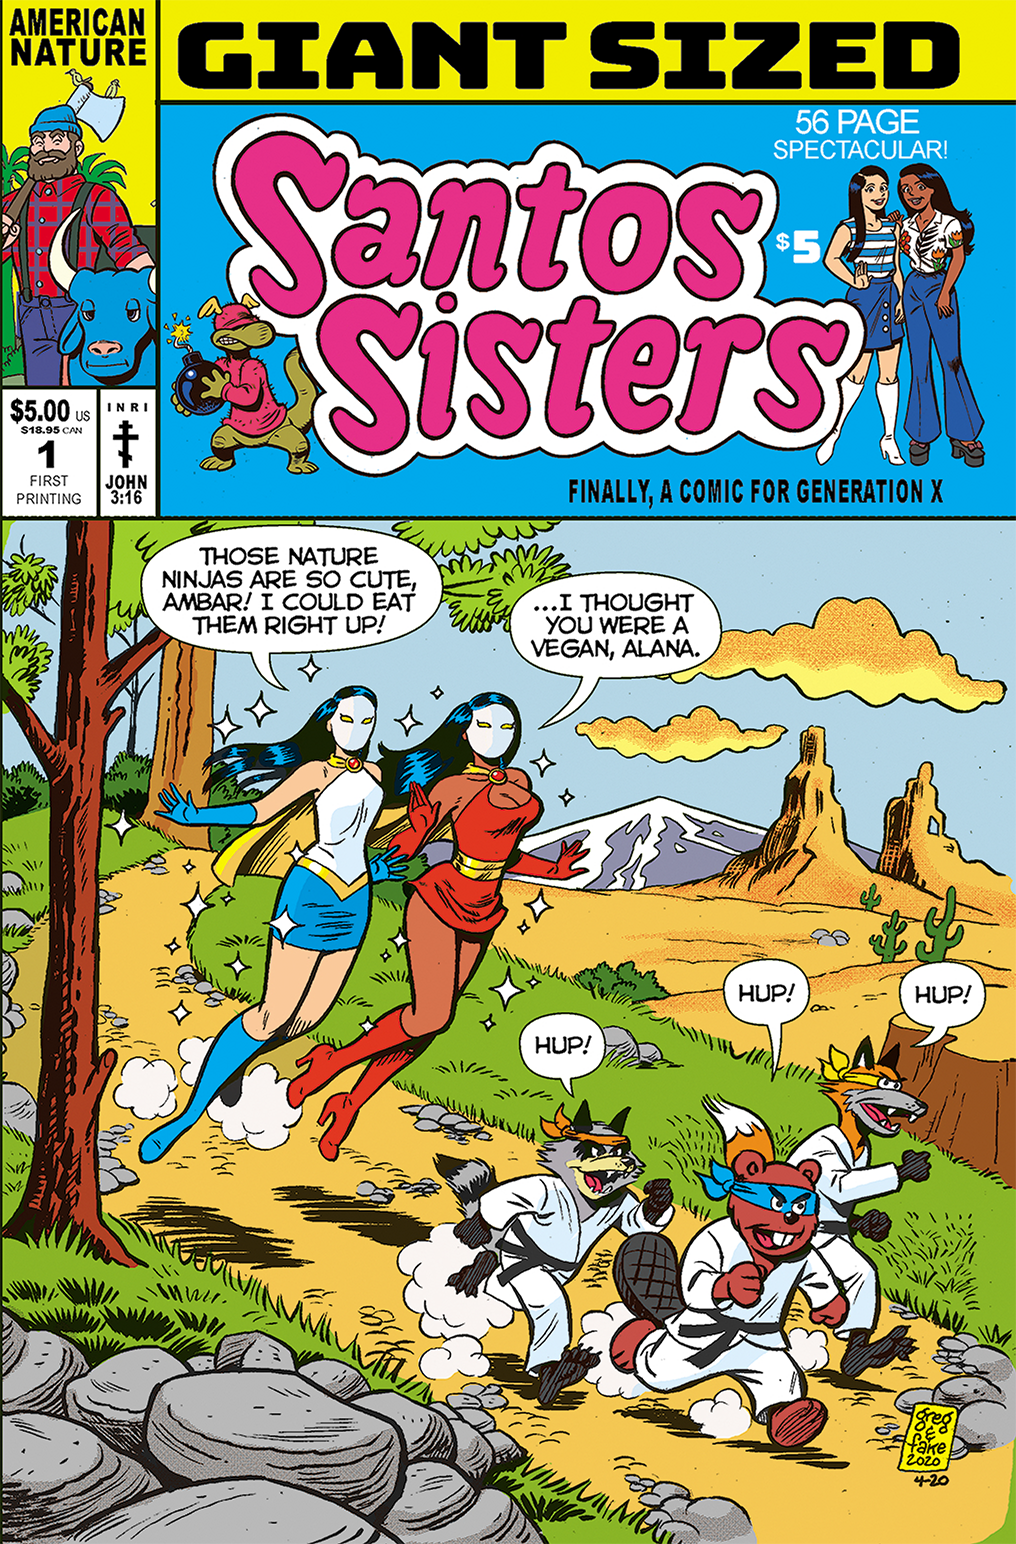 Giant Sized Santos Sisters #1 by Greg and Fake